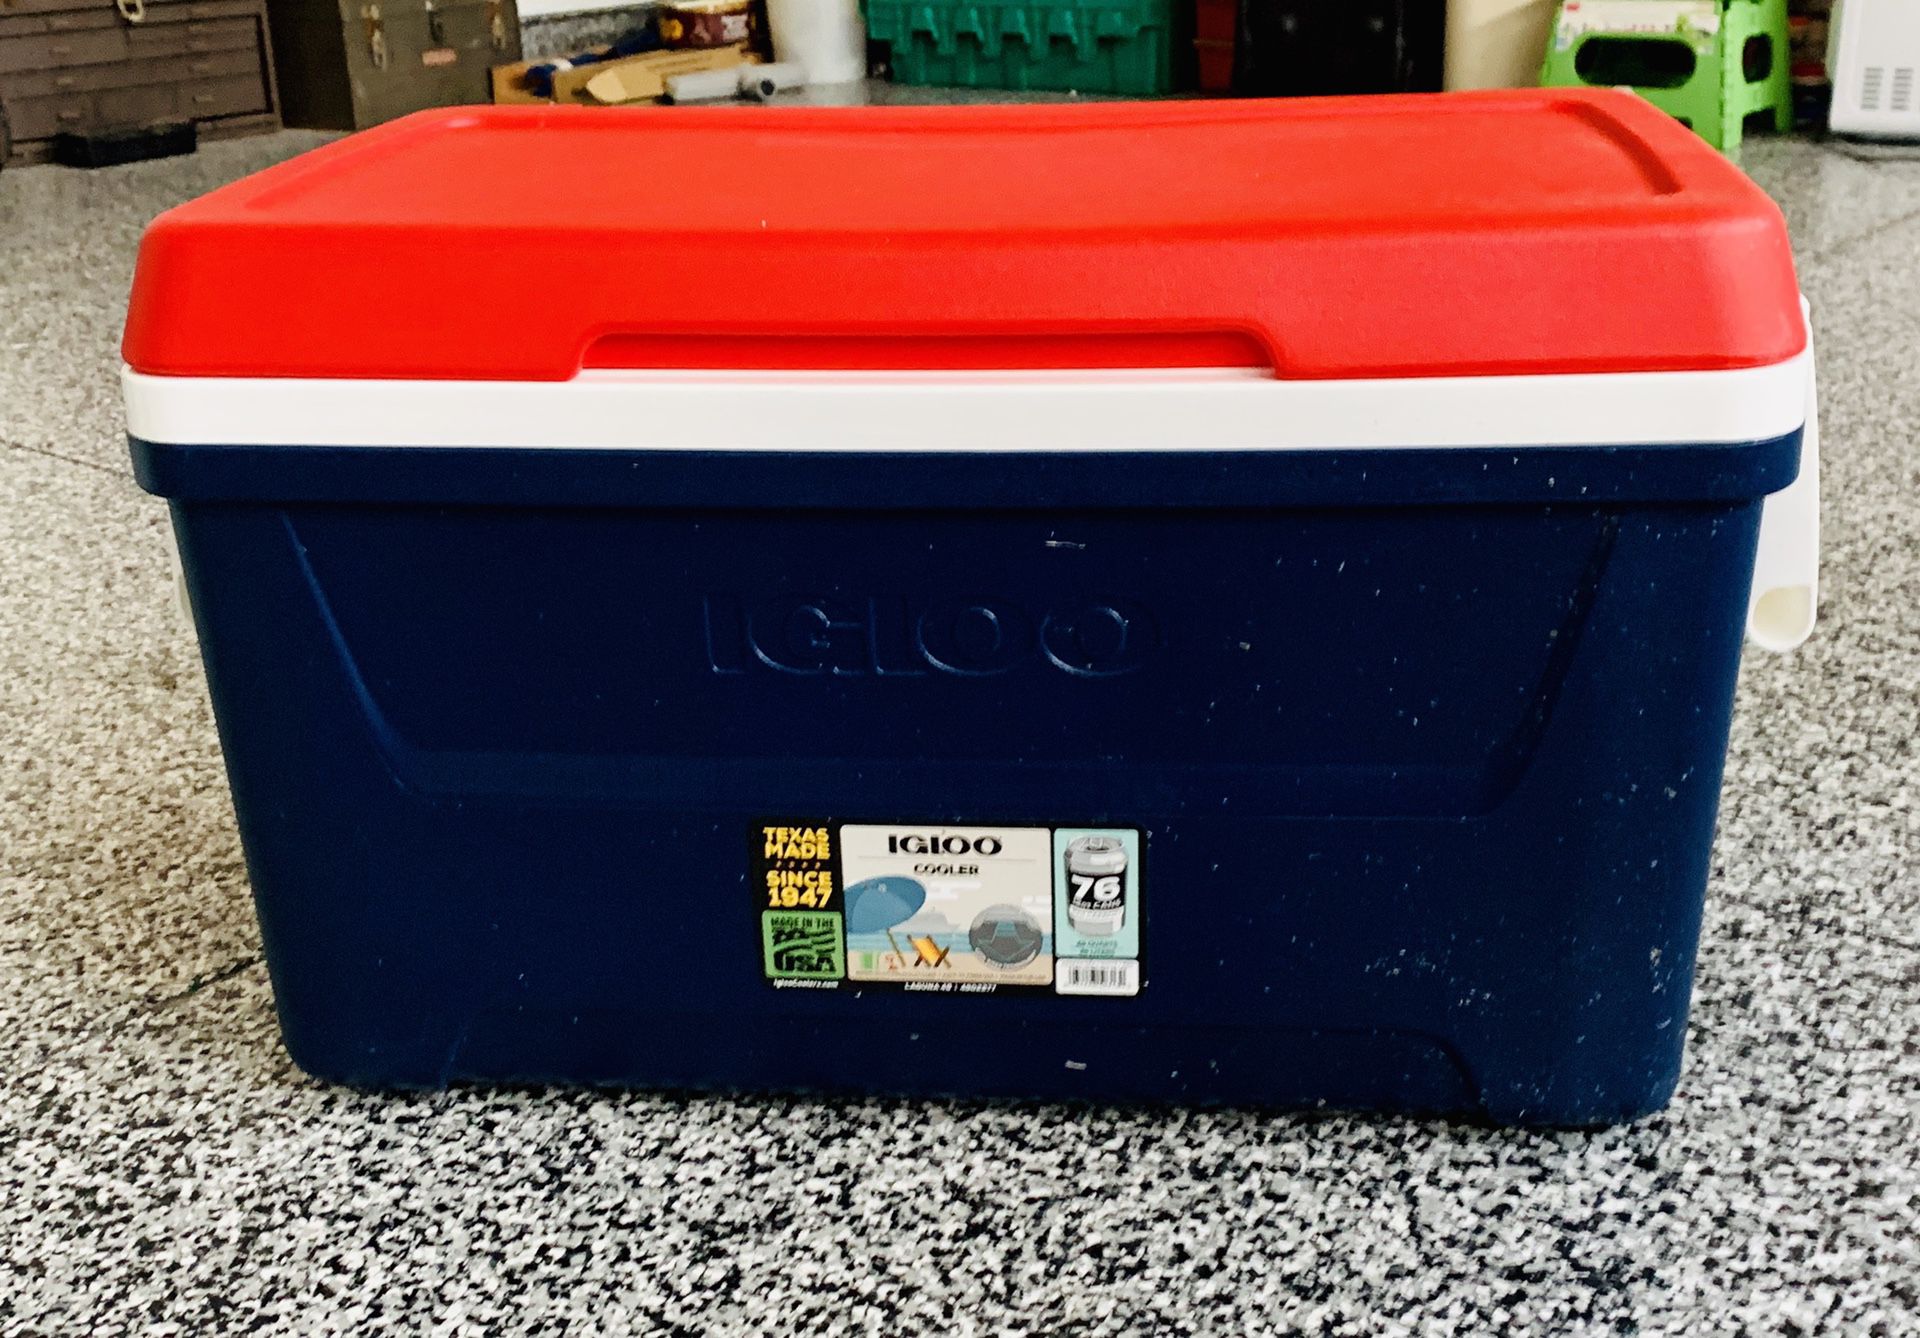 Igloo 48 quart cooler = 76 12oz cans (red white and blue)